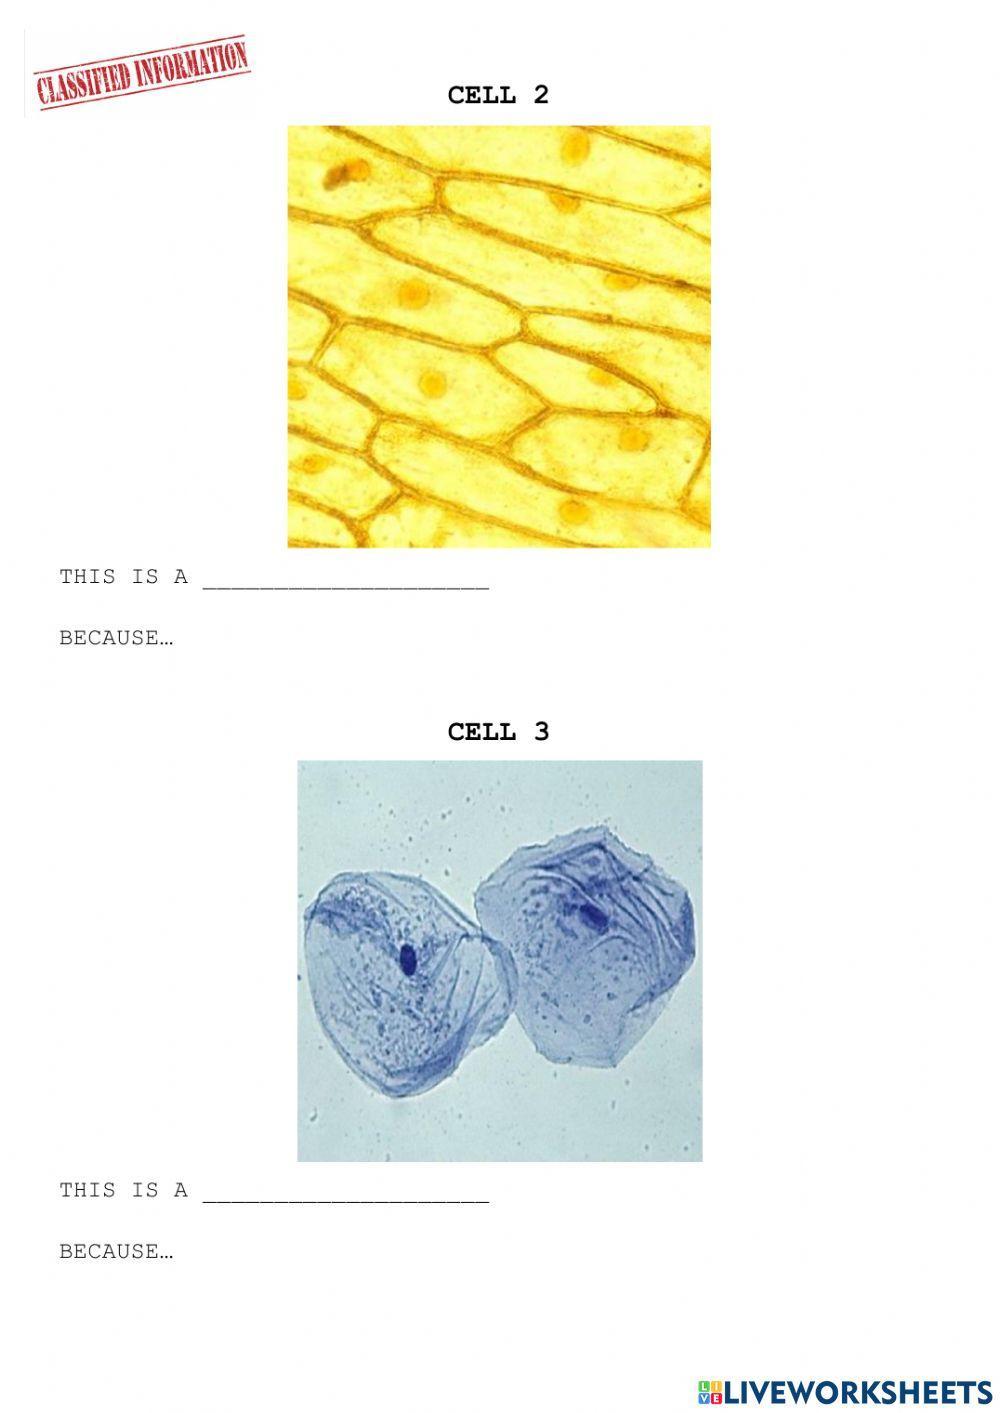 Cell recognition